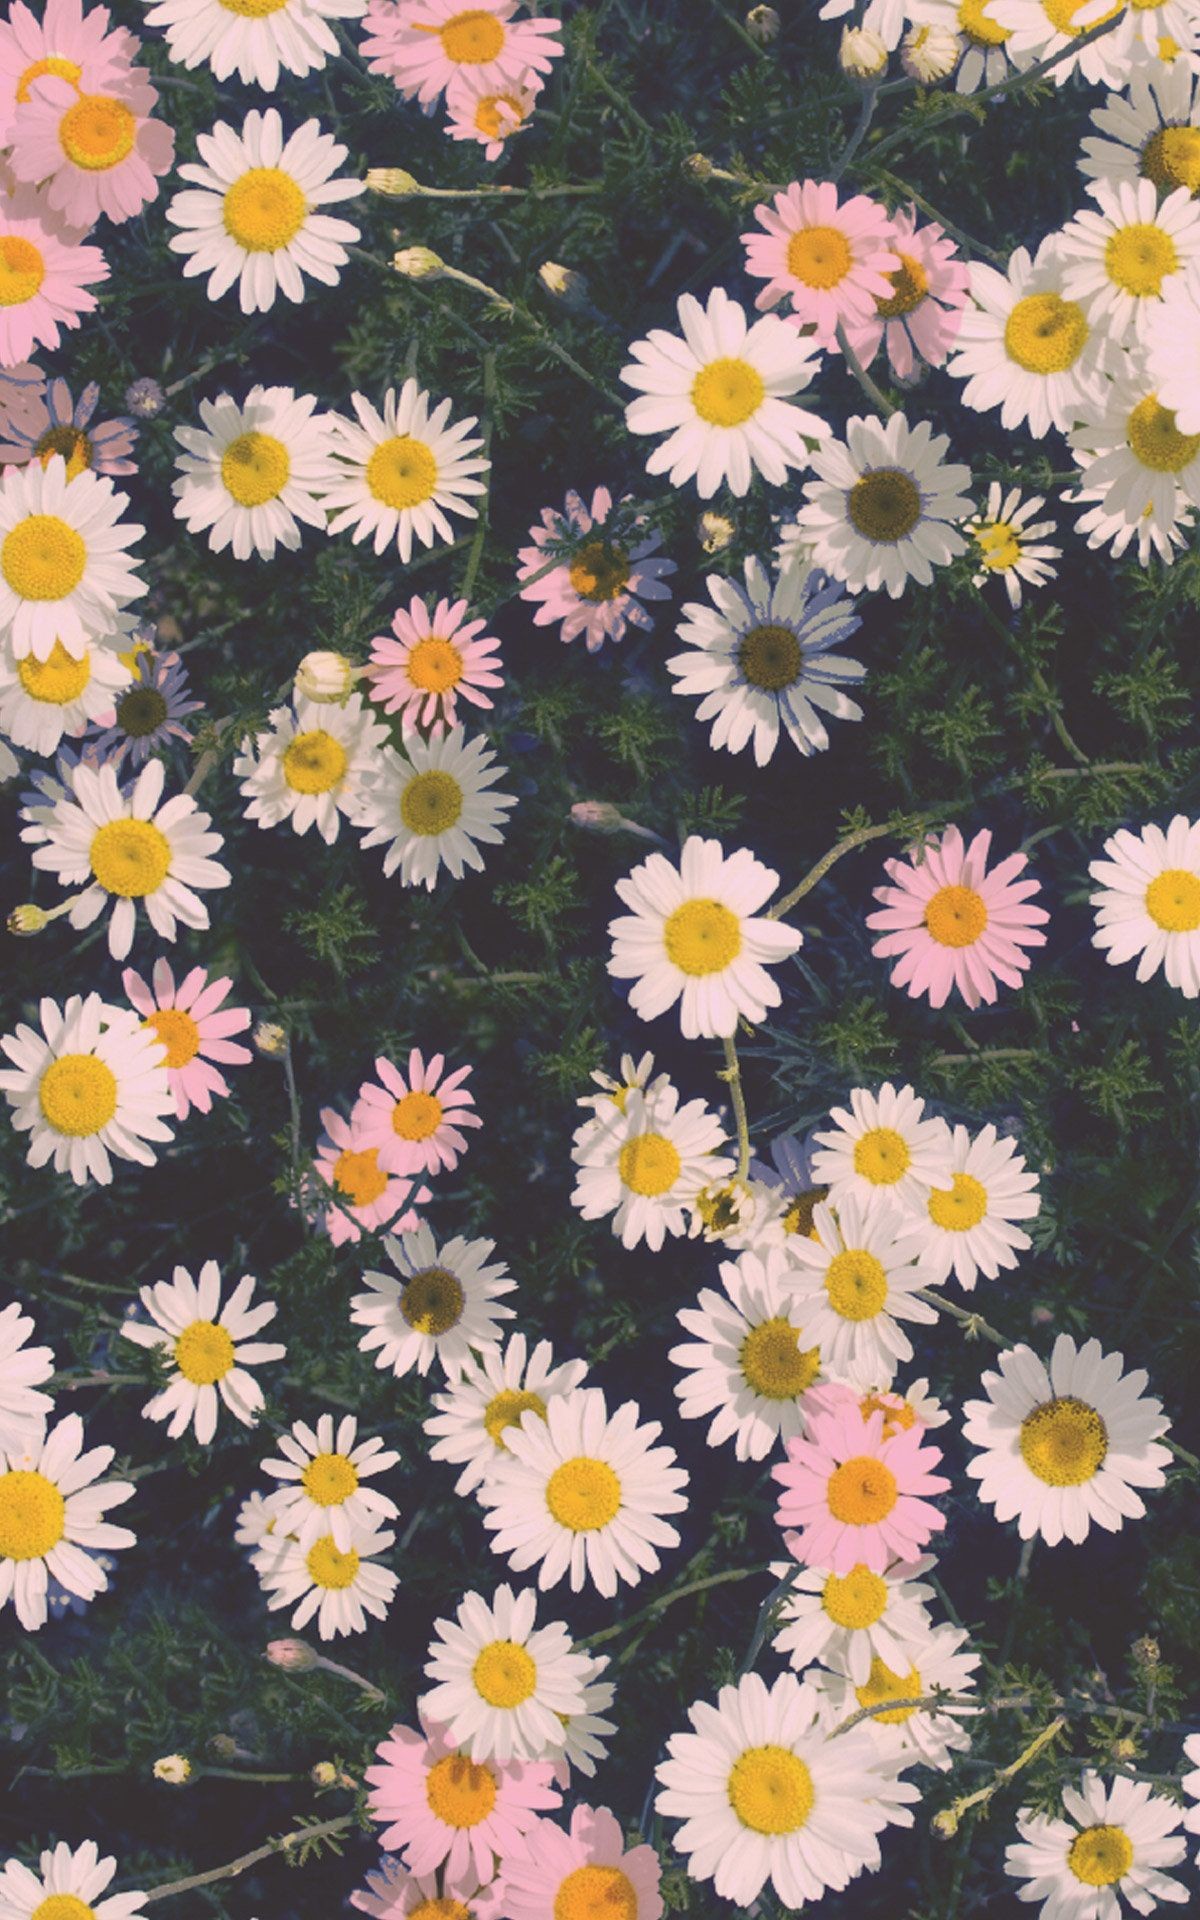 1200x1920 ... Flower Iphone 6 Wallpapers Hd. Download